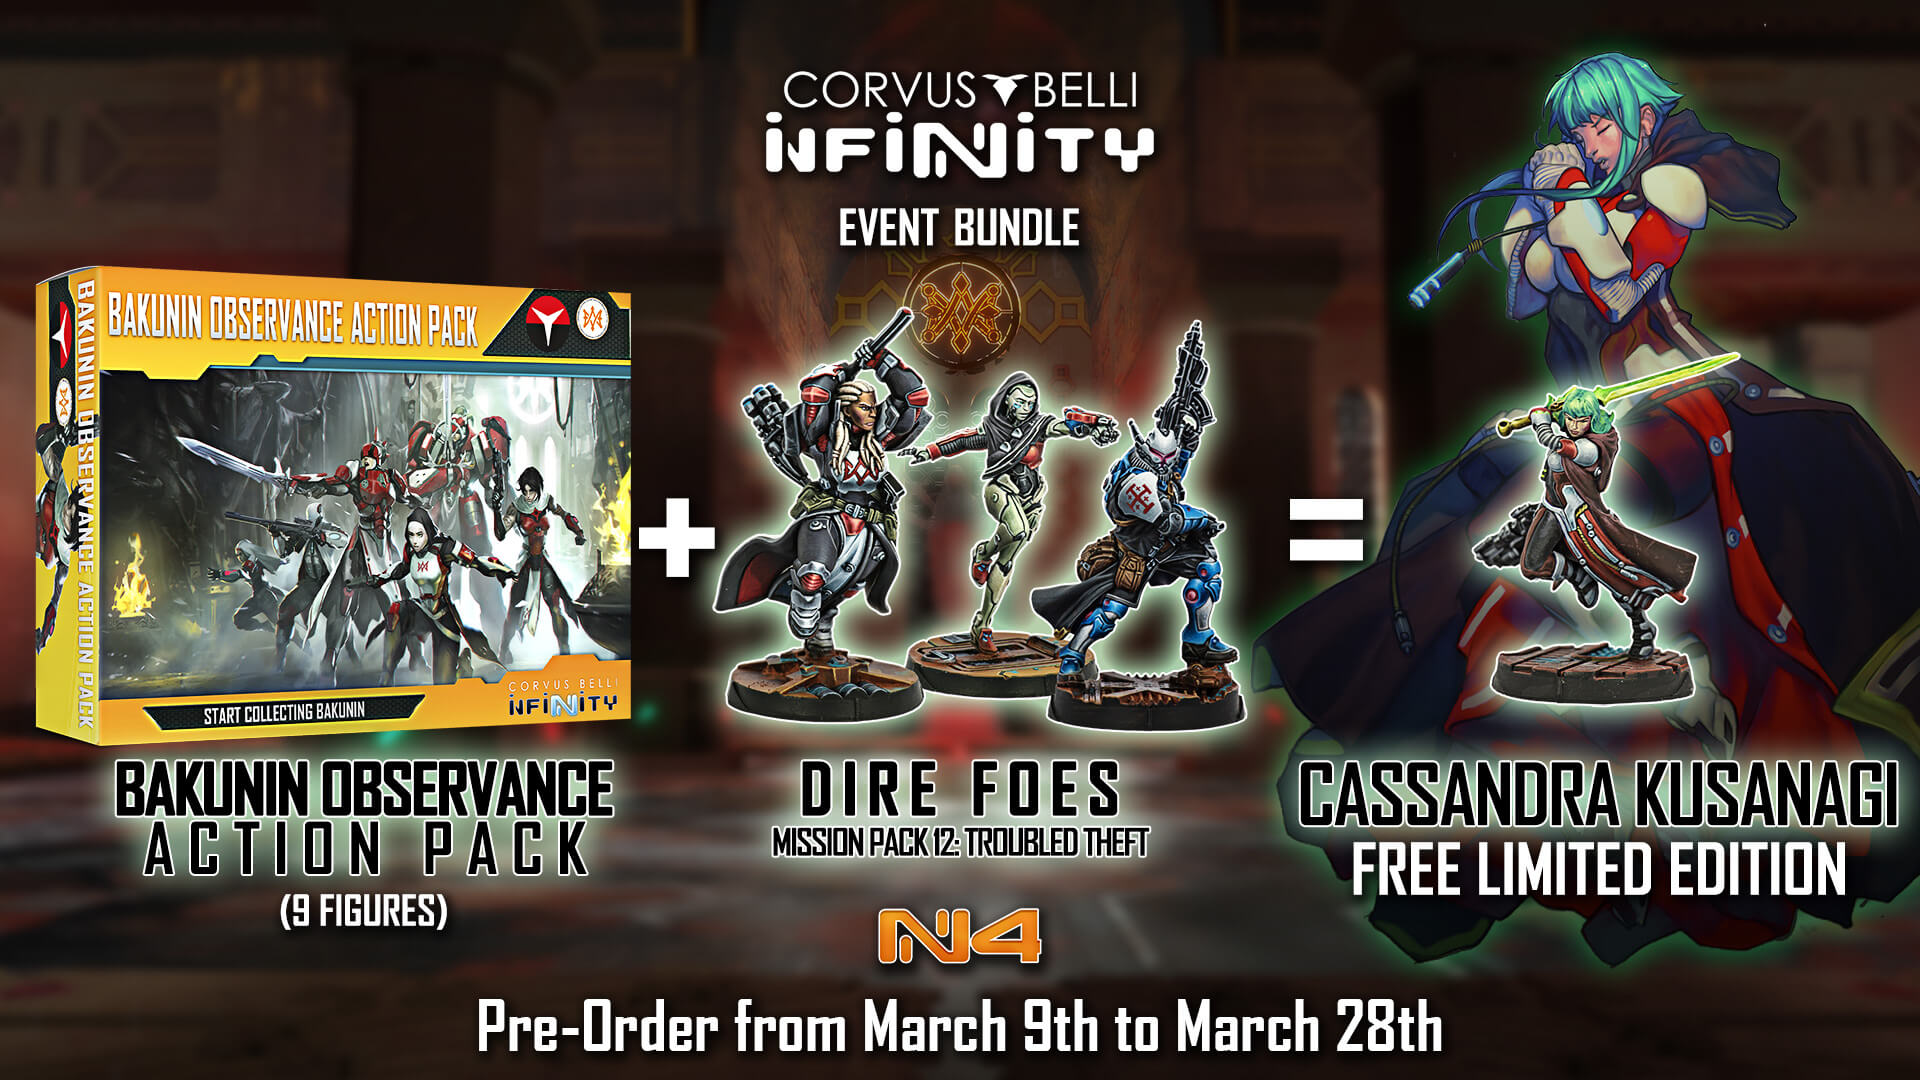 The 3 products included in the Infinity Bakunin Observance preorder bonus window.